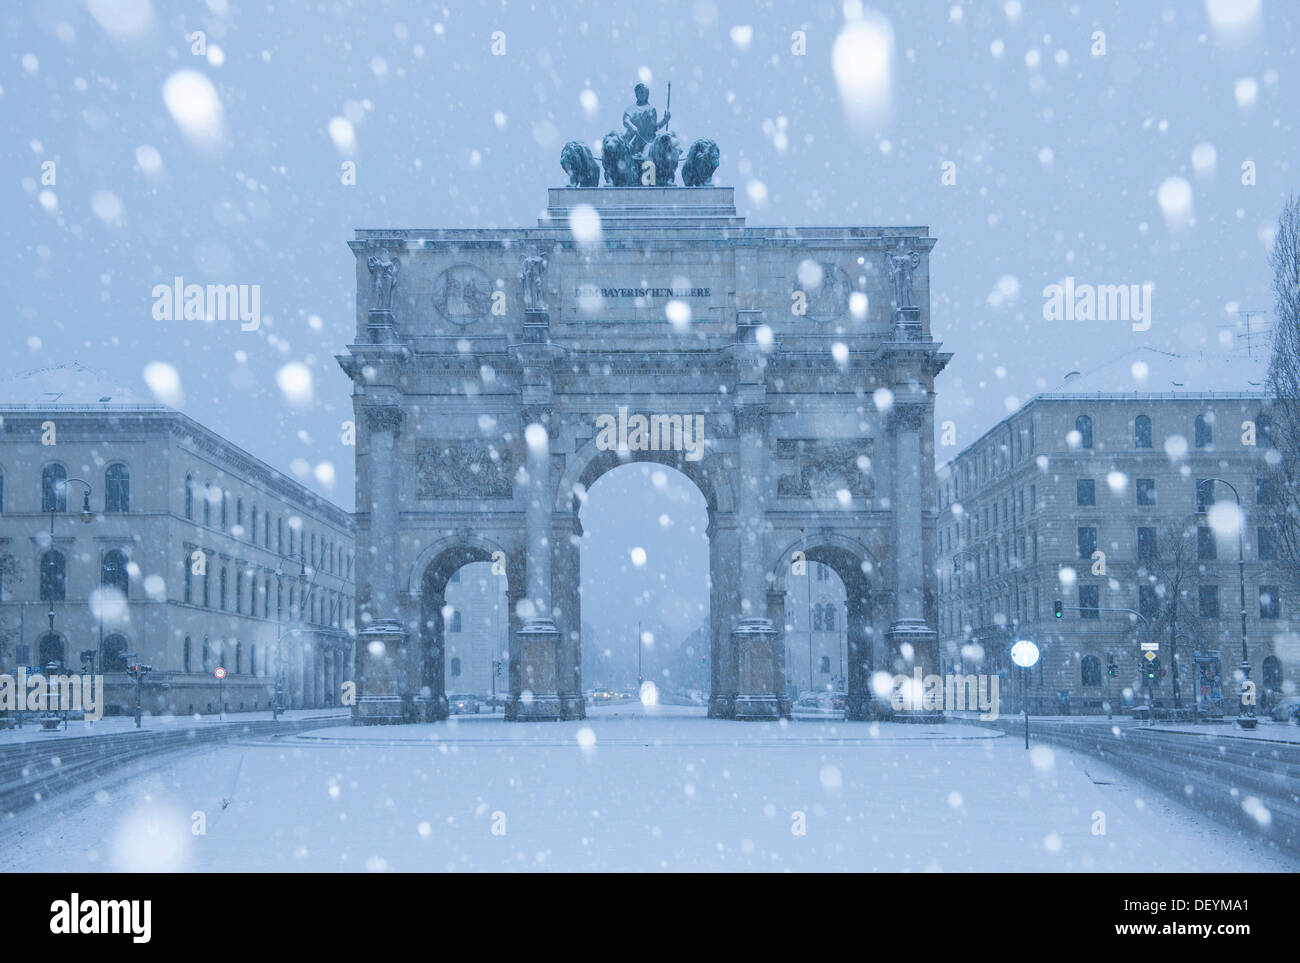 Siegestor, victory gate, in the snow, München, Bavaria, Germany Stock Photo